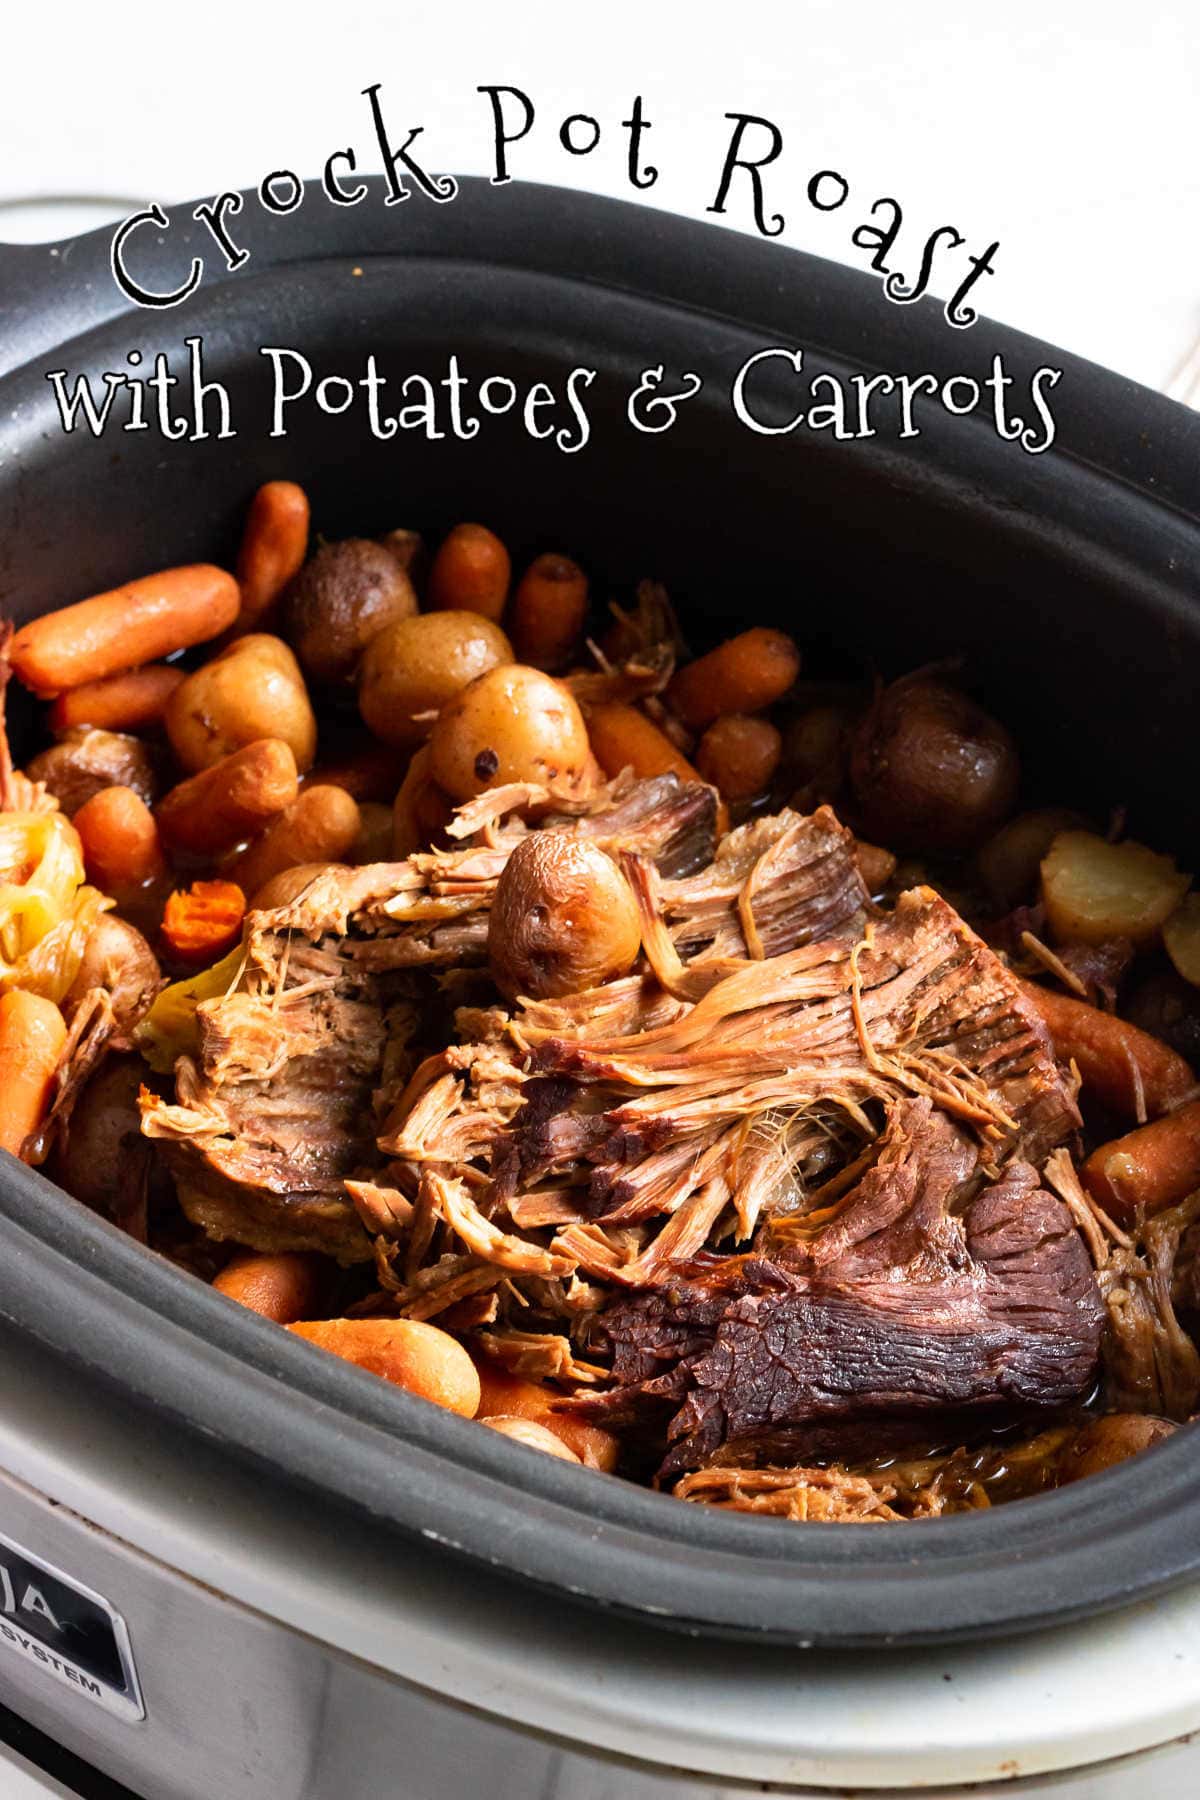 Finished roast and vegetables in a slow cooker with title text overlay.